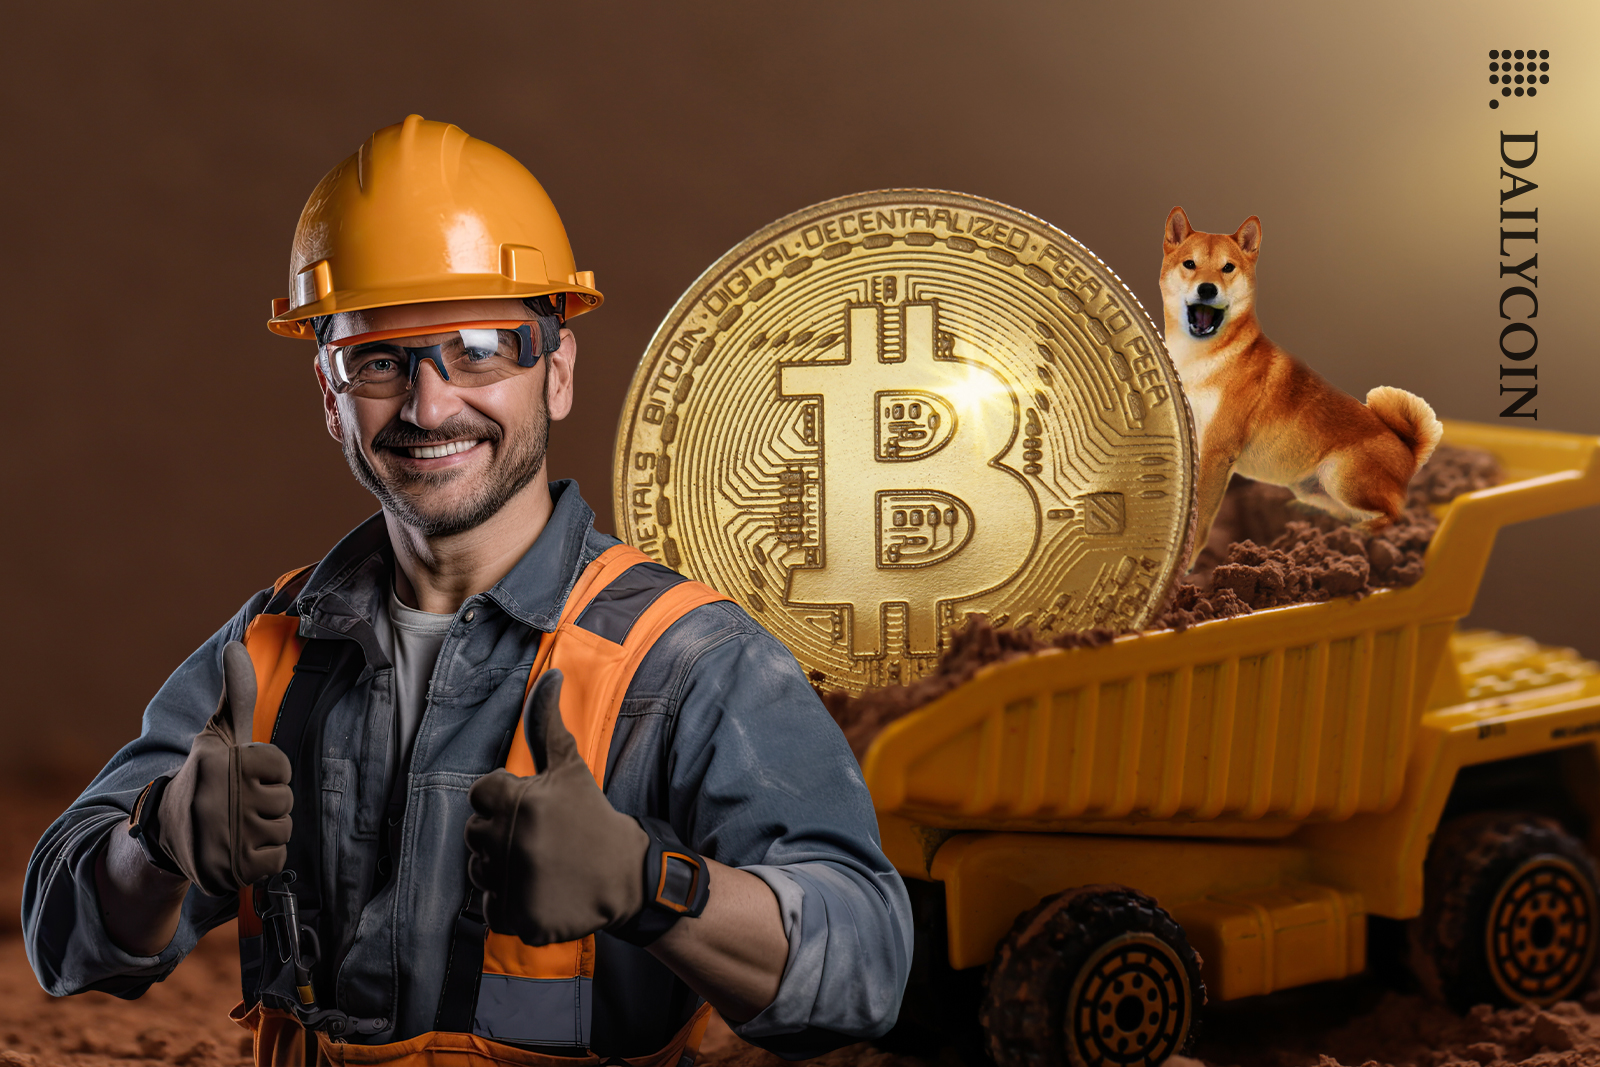 Miner is happy to give away his Shiba for the Bticoin.